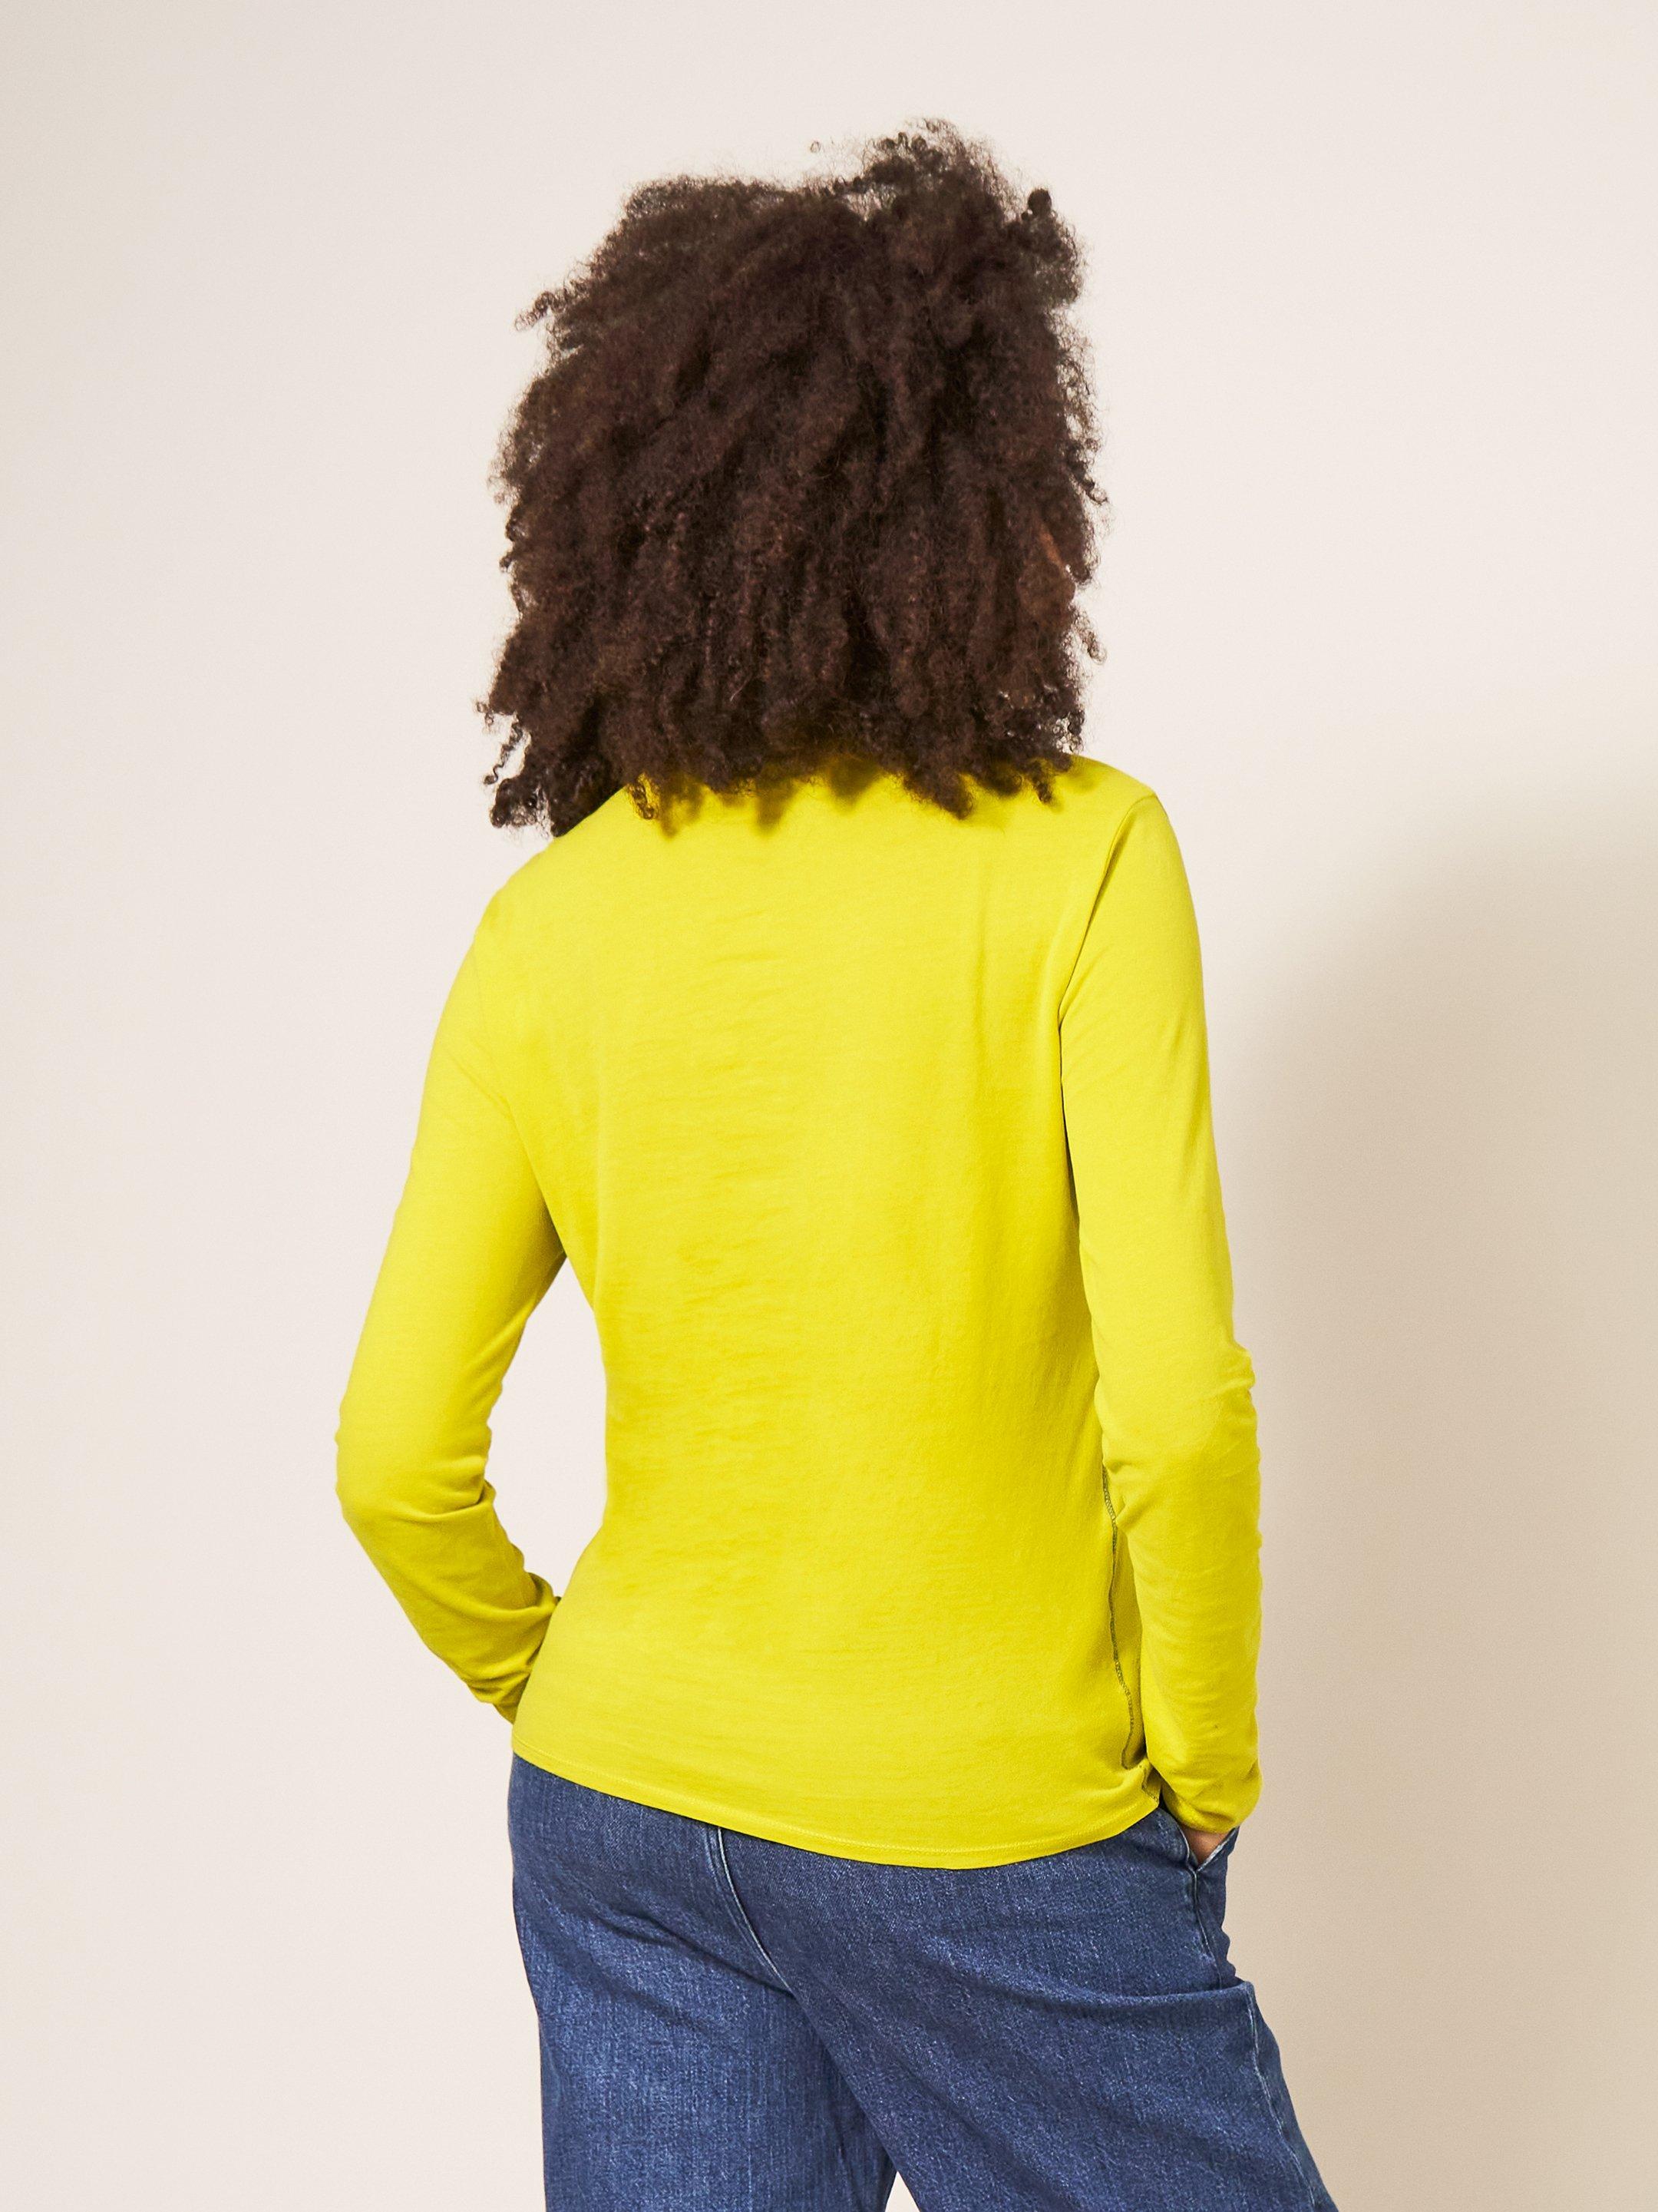 CAMILE HIGH NECK TEE in MID CHART - MODEL BACK